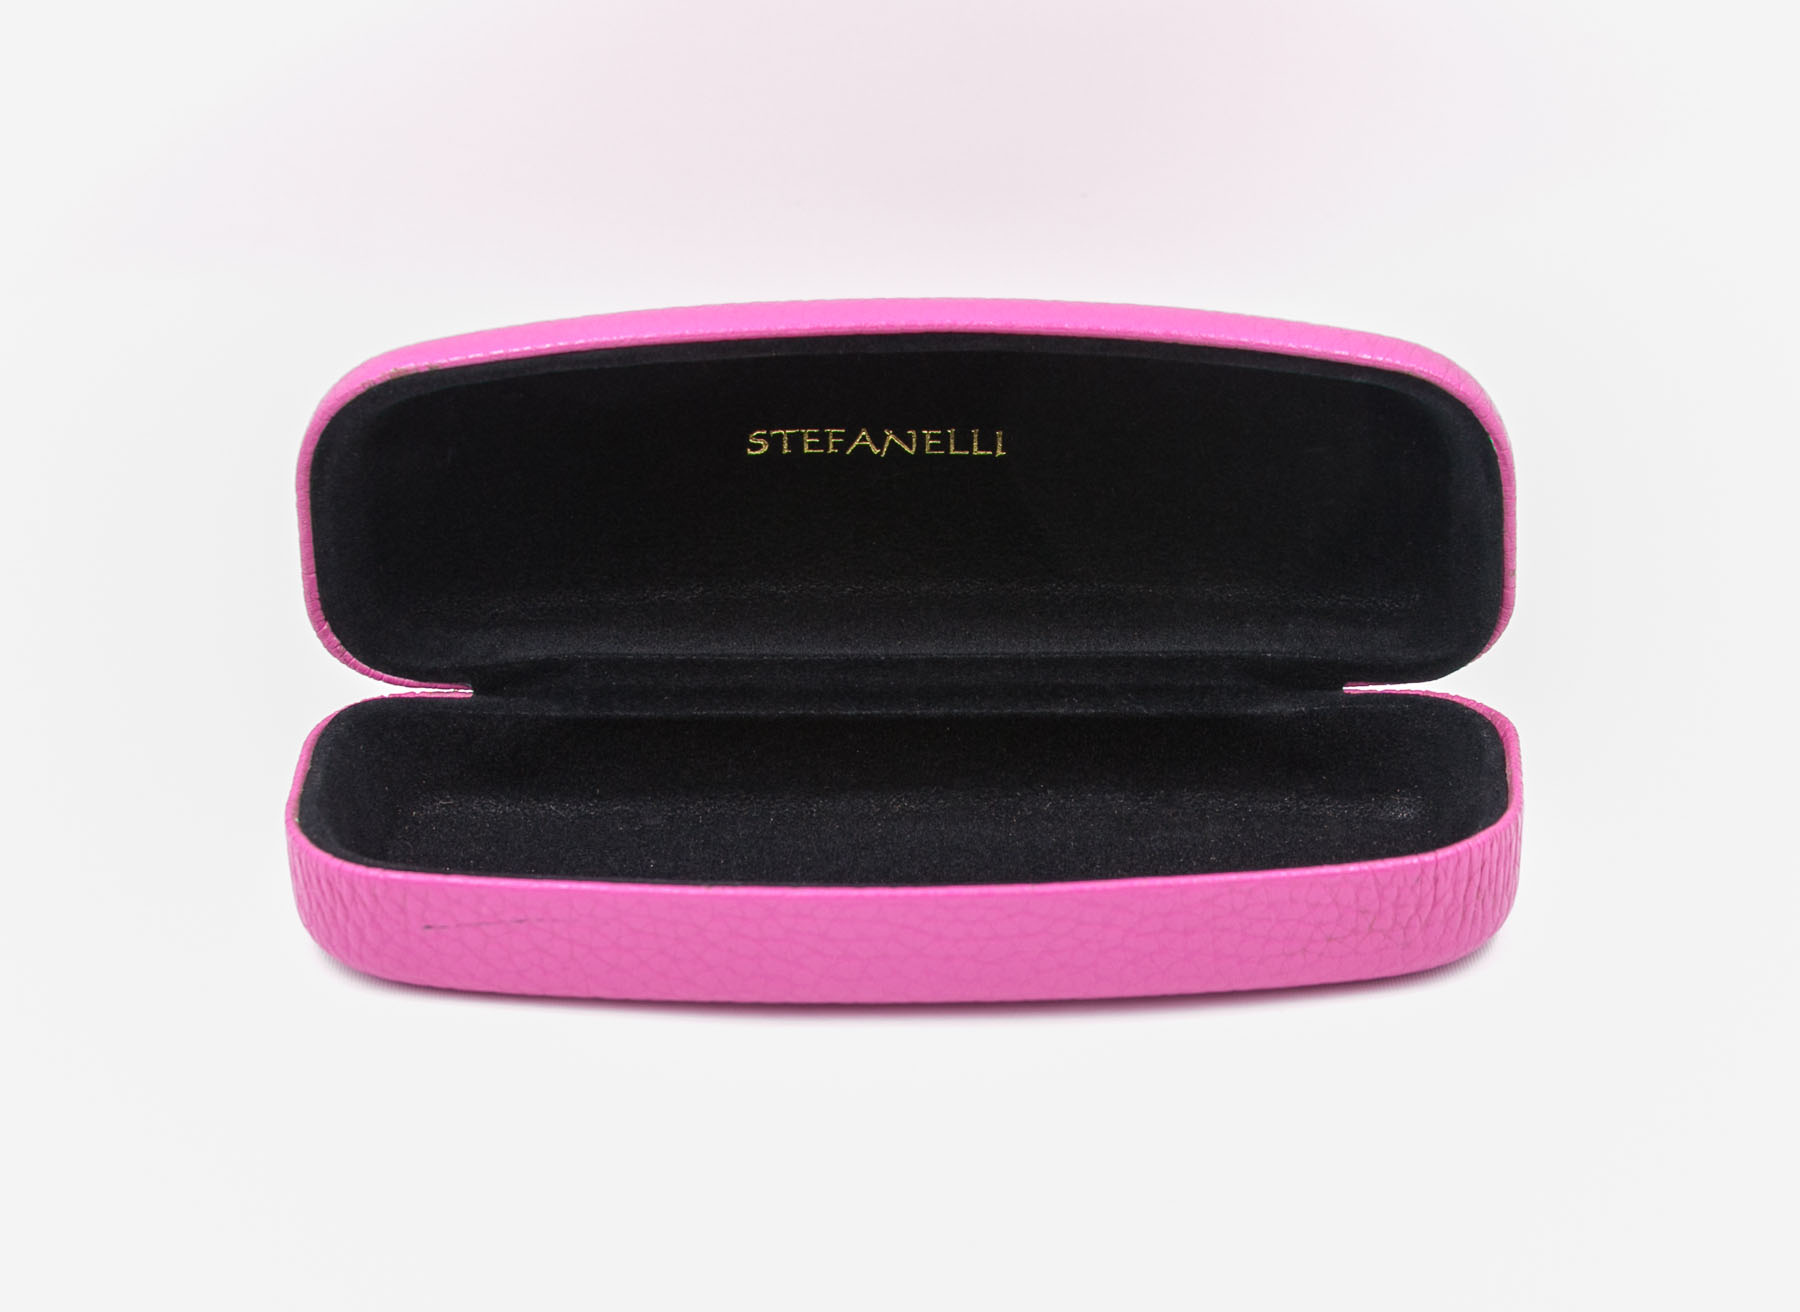 2021 Glasses Case Sunglasses Pink Glasses Case Printed with The LOGO